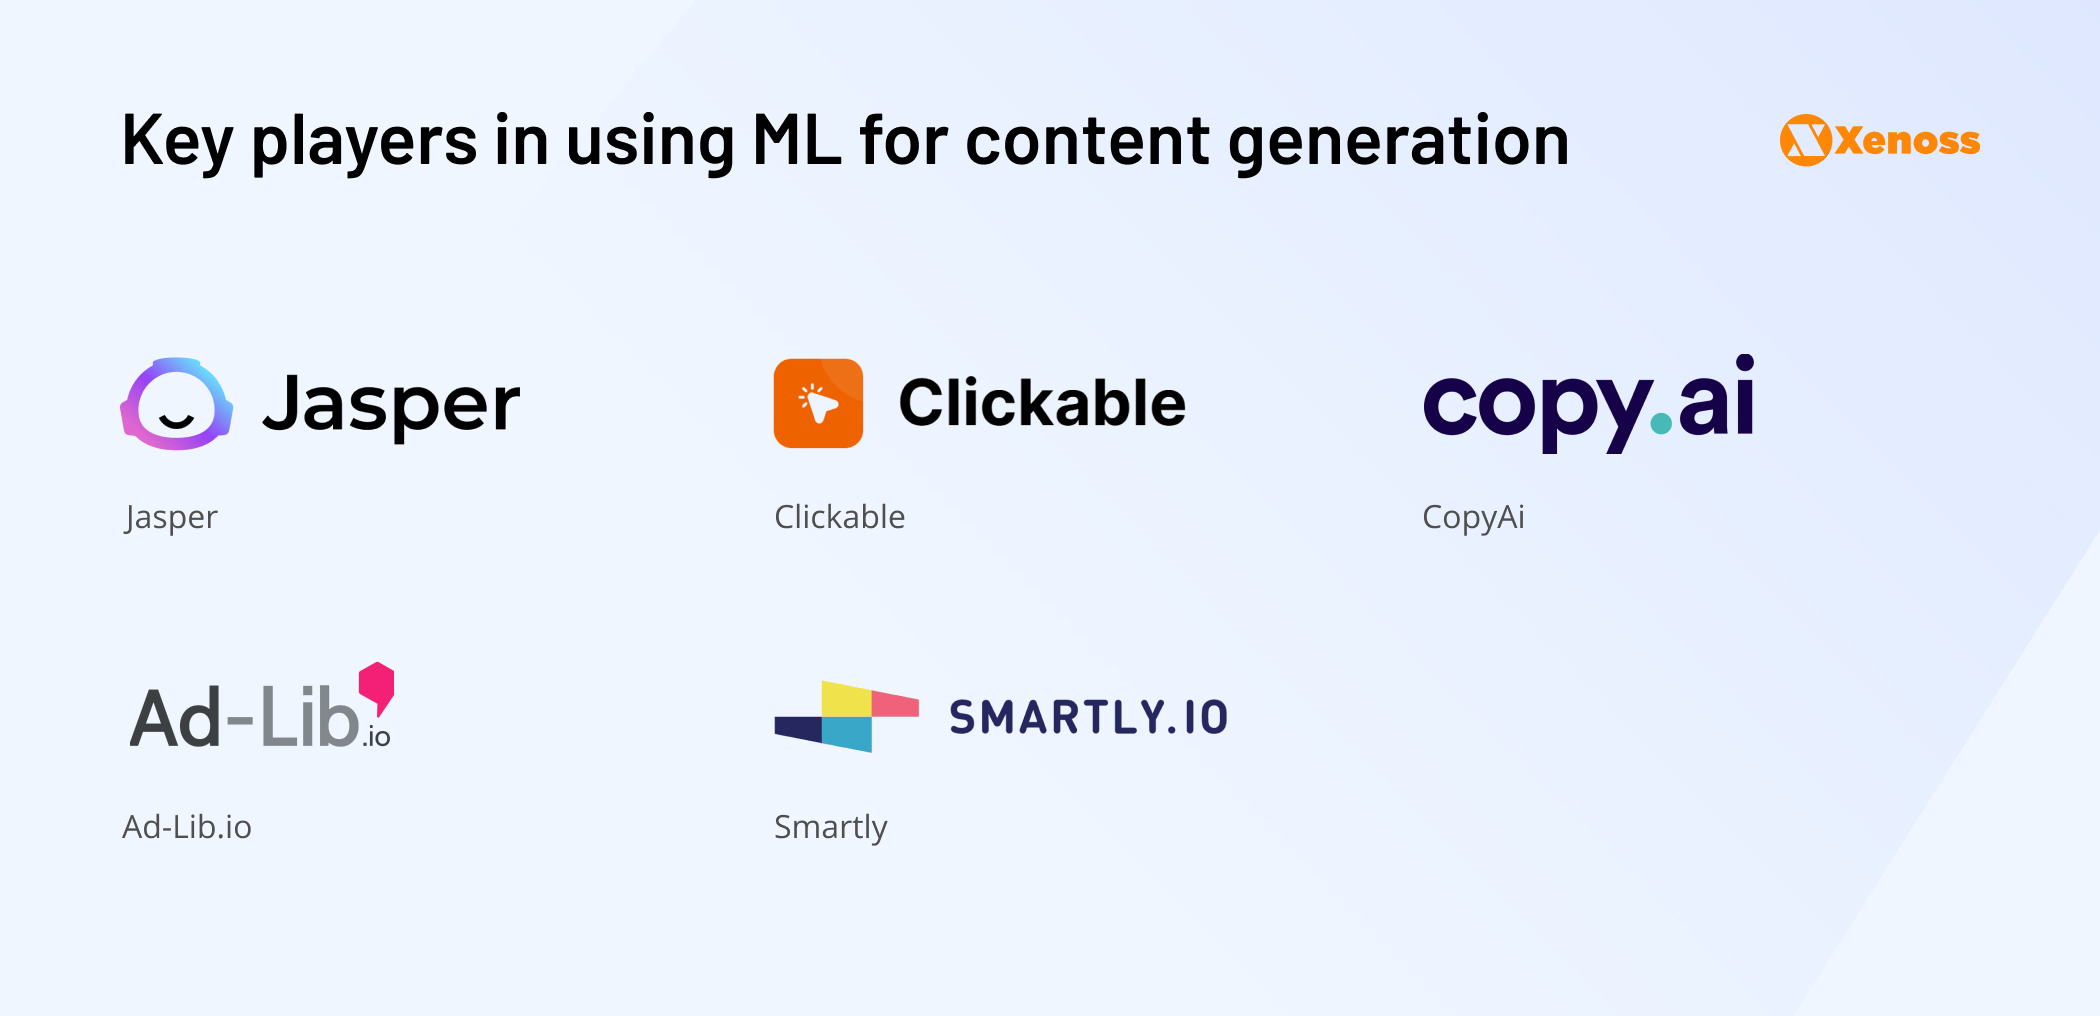 Key applications of machine learning models for content generation tools